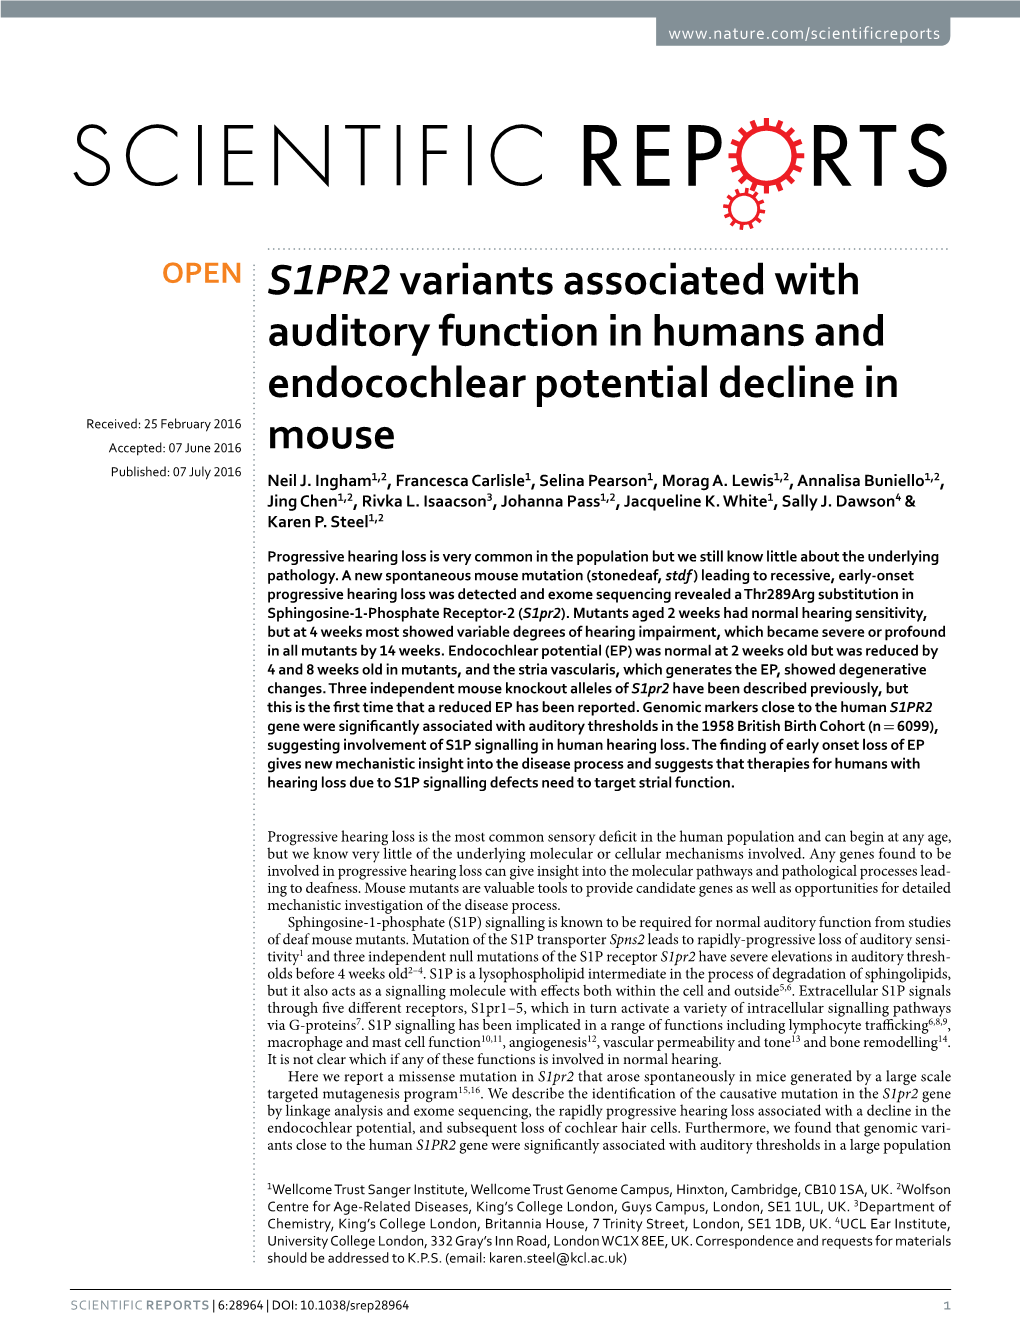 S1PR2 Variants Associated with Auditory Function in Humans